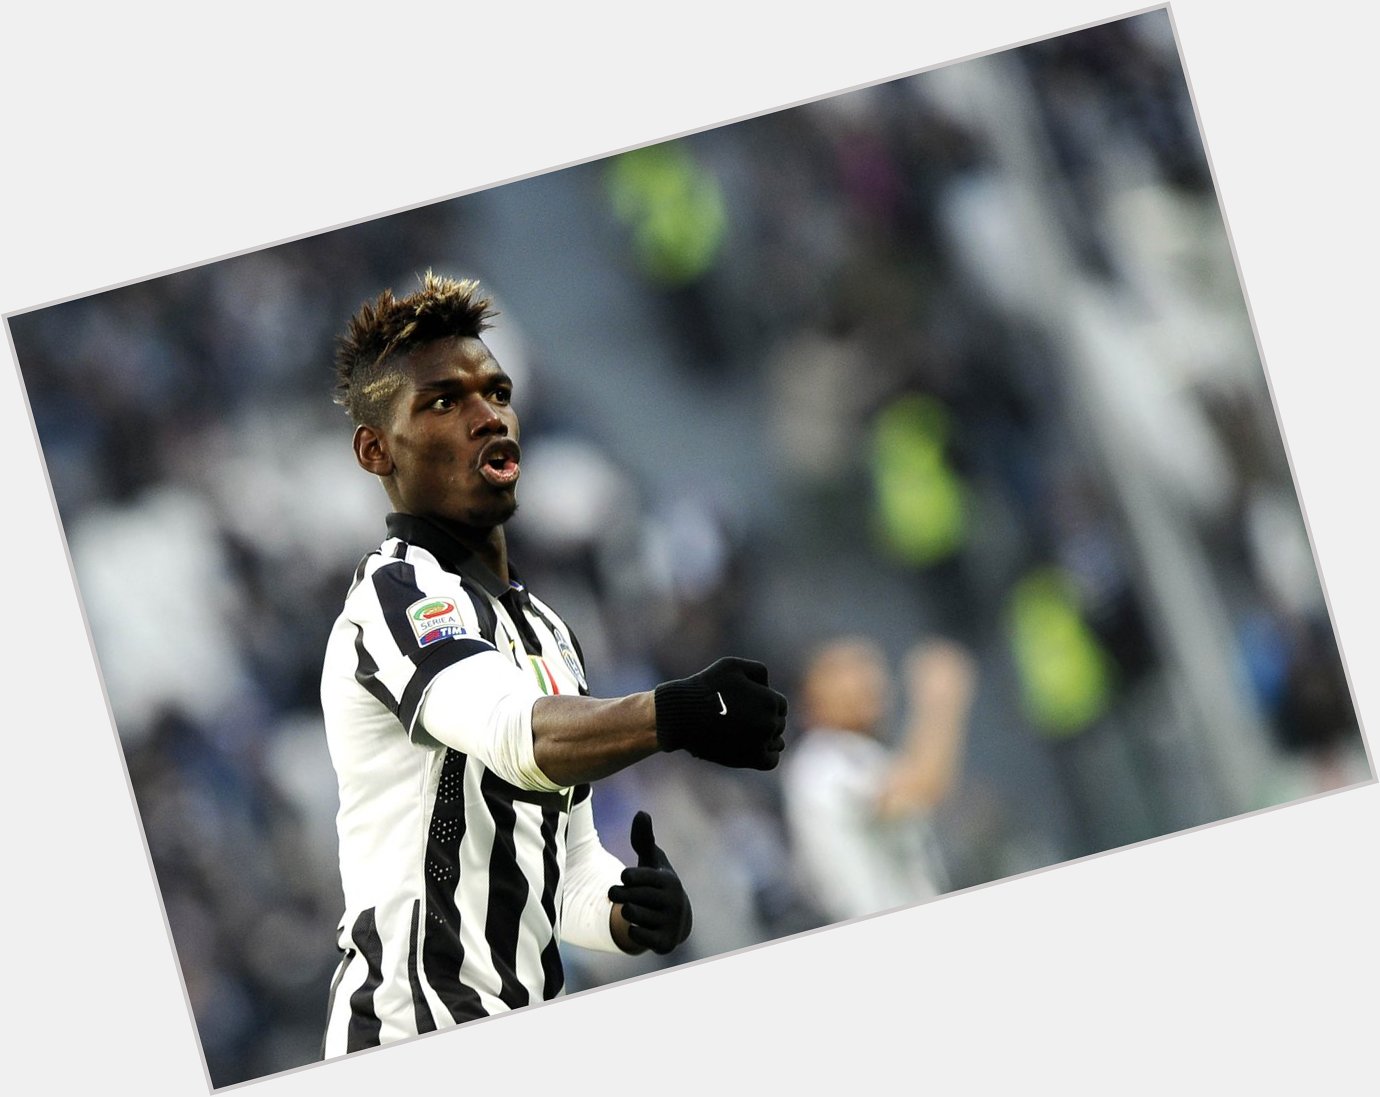 Happy 22nd birthday to Paul Pogba. No Serie A player has scored more goals from outside the box this season (4). 